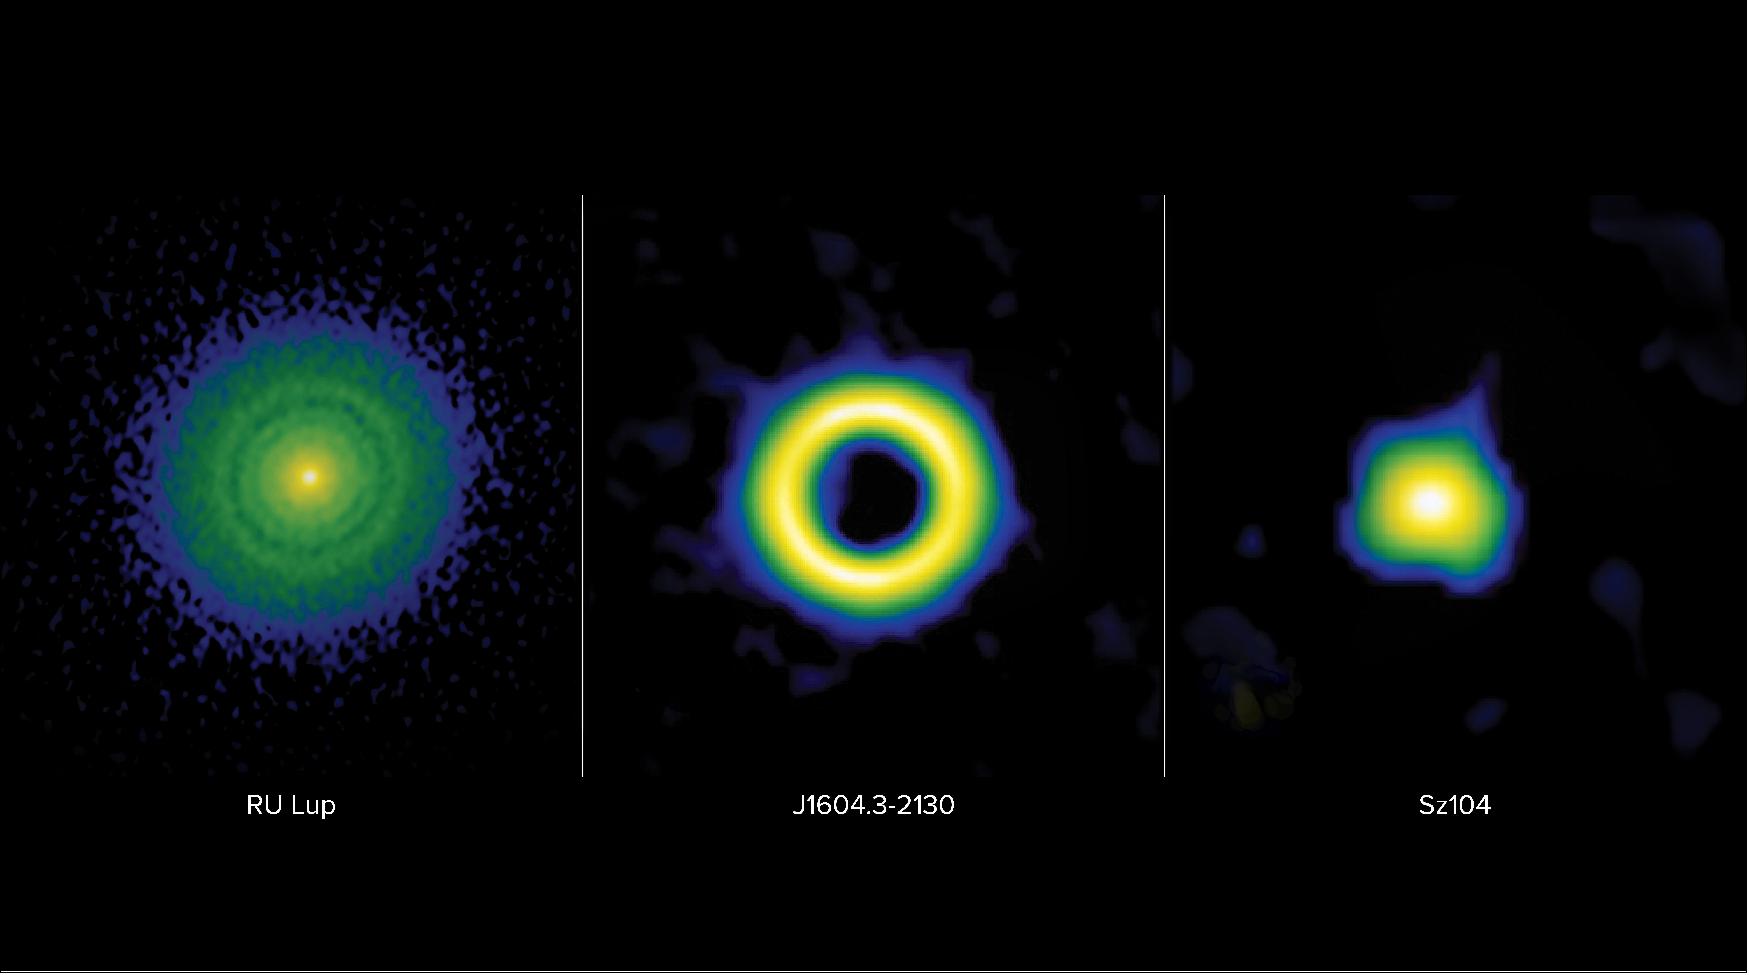 Figure 36: Protoplanetary disks are classified into three main categories: transition, ring, or extended. These false-color images from ALMA show these classifications in stark contrast. On left: the ring disk of RU Lup is characterized by narrow gaps thought to be carved by giant planets with masses ranging between a Neptune mass and a Jupiter mass. Middle: the transition disk of J1604.3-2130 is characterized by a large inner cavity thought to be carved by planets more massive than Jupiter, also known as Super-Jovian planets. On right: the compact disk of Sz104 is believed not to contain giant planets, as it lacks the telltale gaps and cavities associated with the presence of giant planets [image credit: ALMA (ESO/NAOJ/NRAO), S. Dagnello (NRAO)]